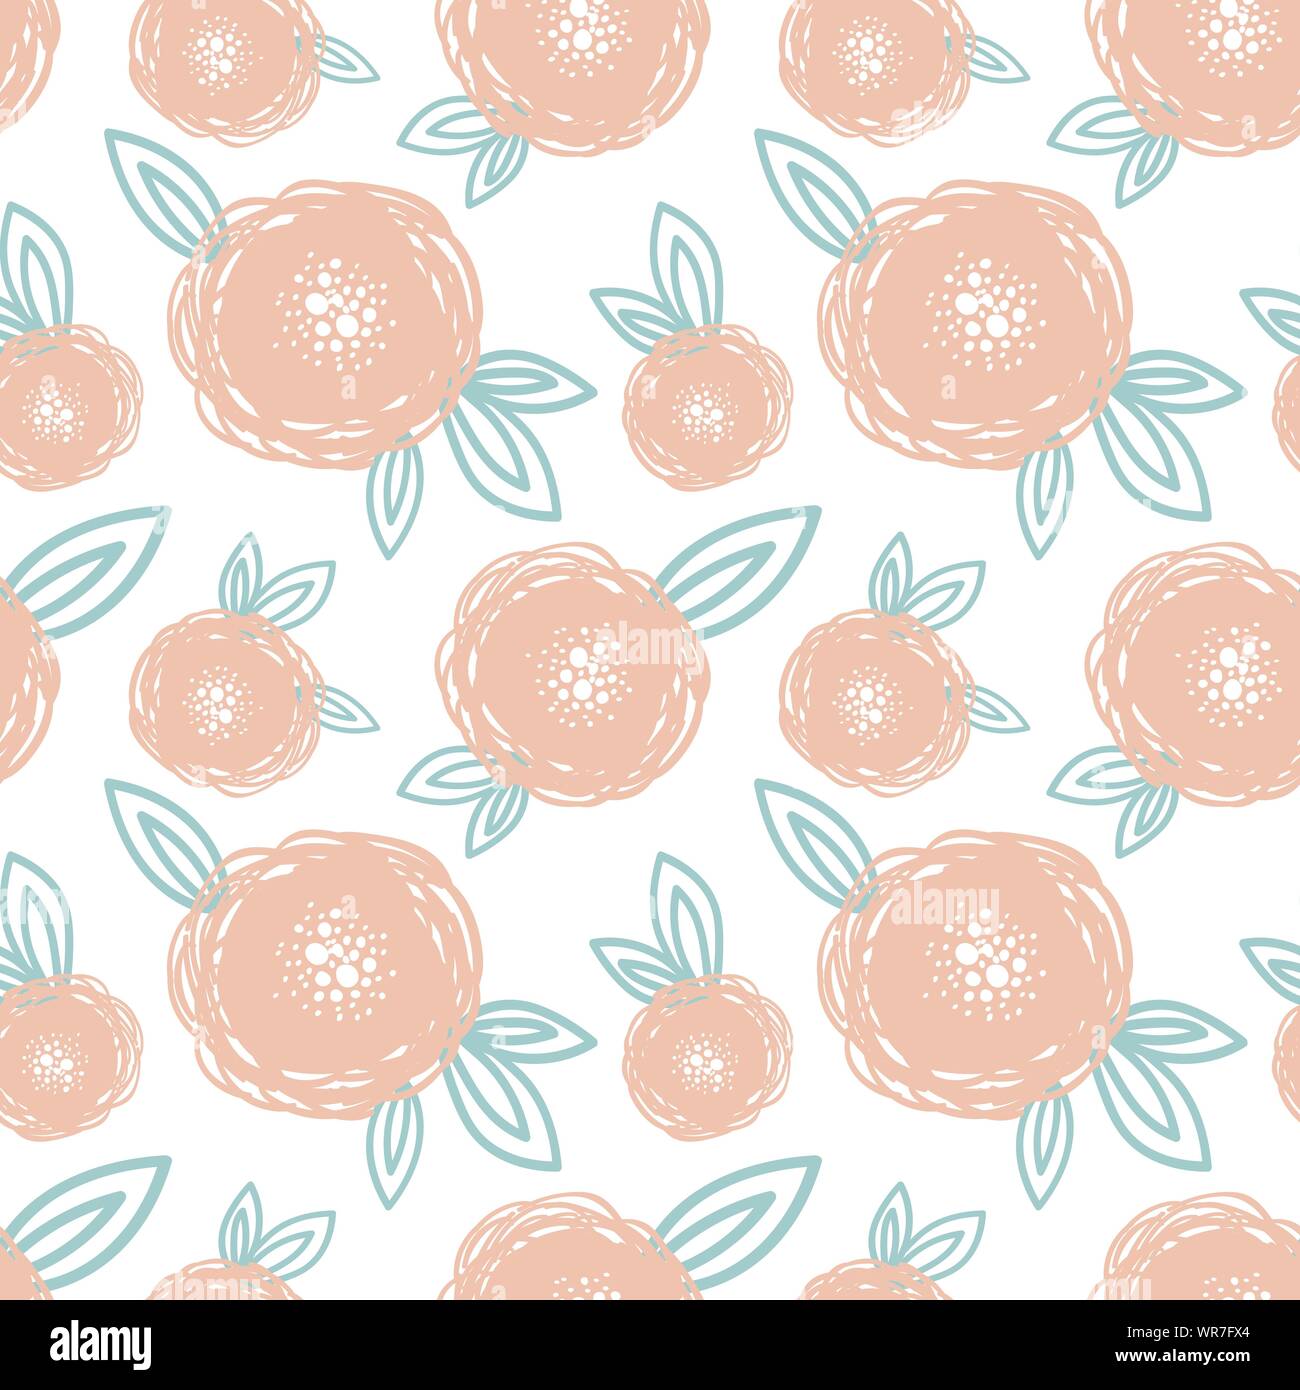 Seamless Pattern Of Cartoon Hand Drawn Pink Cute Flowers And Small